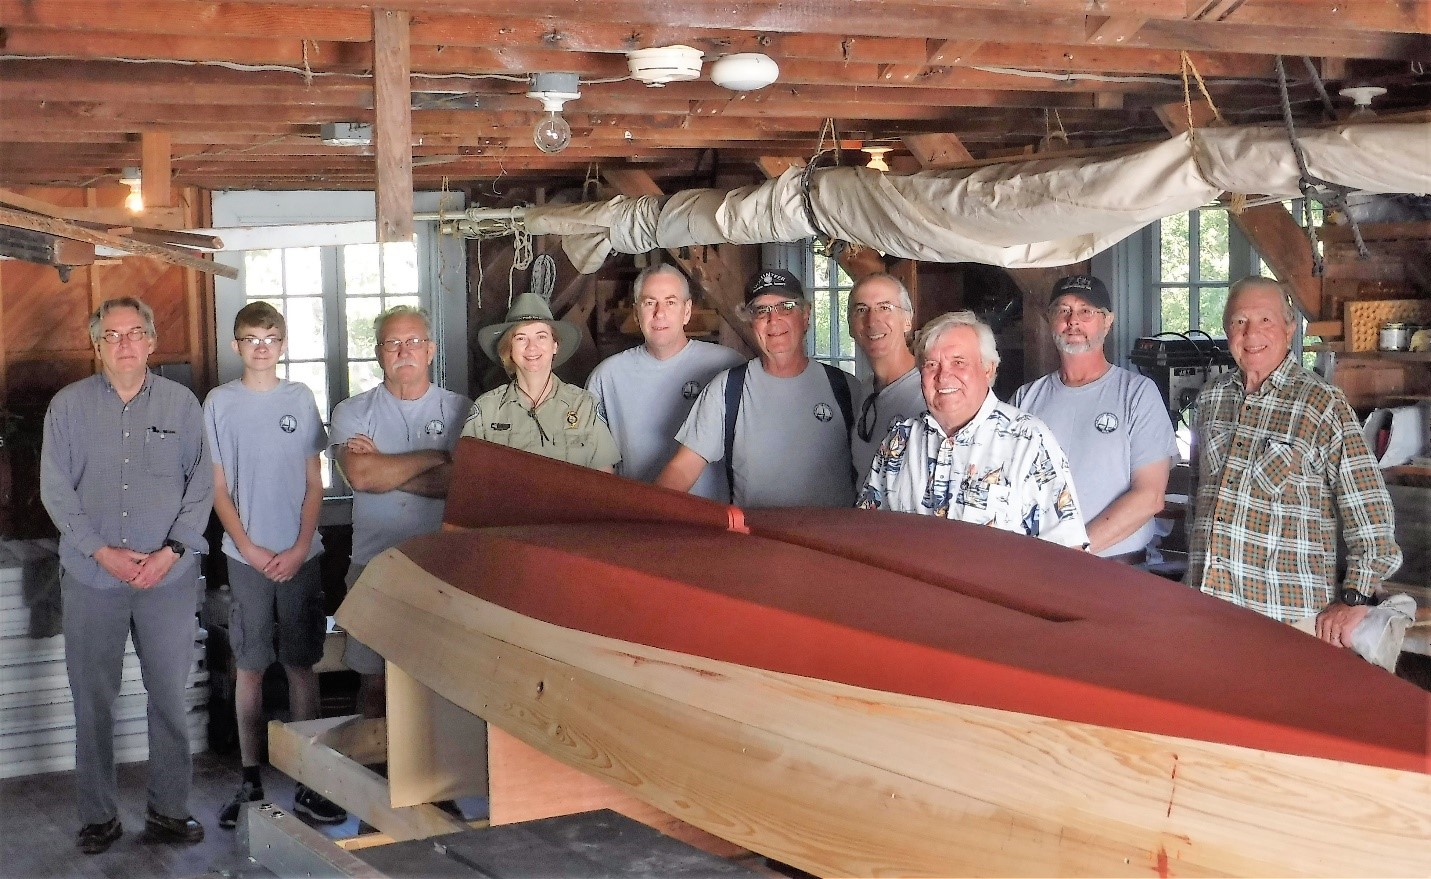 James with boat in progress—second from left